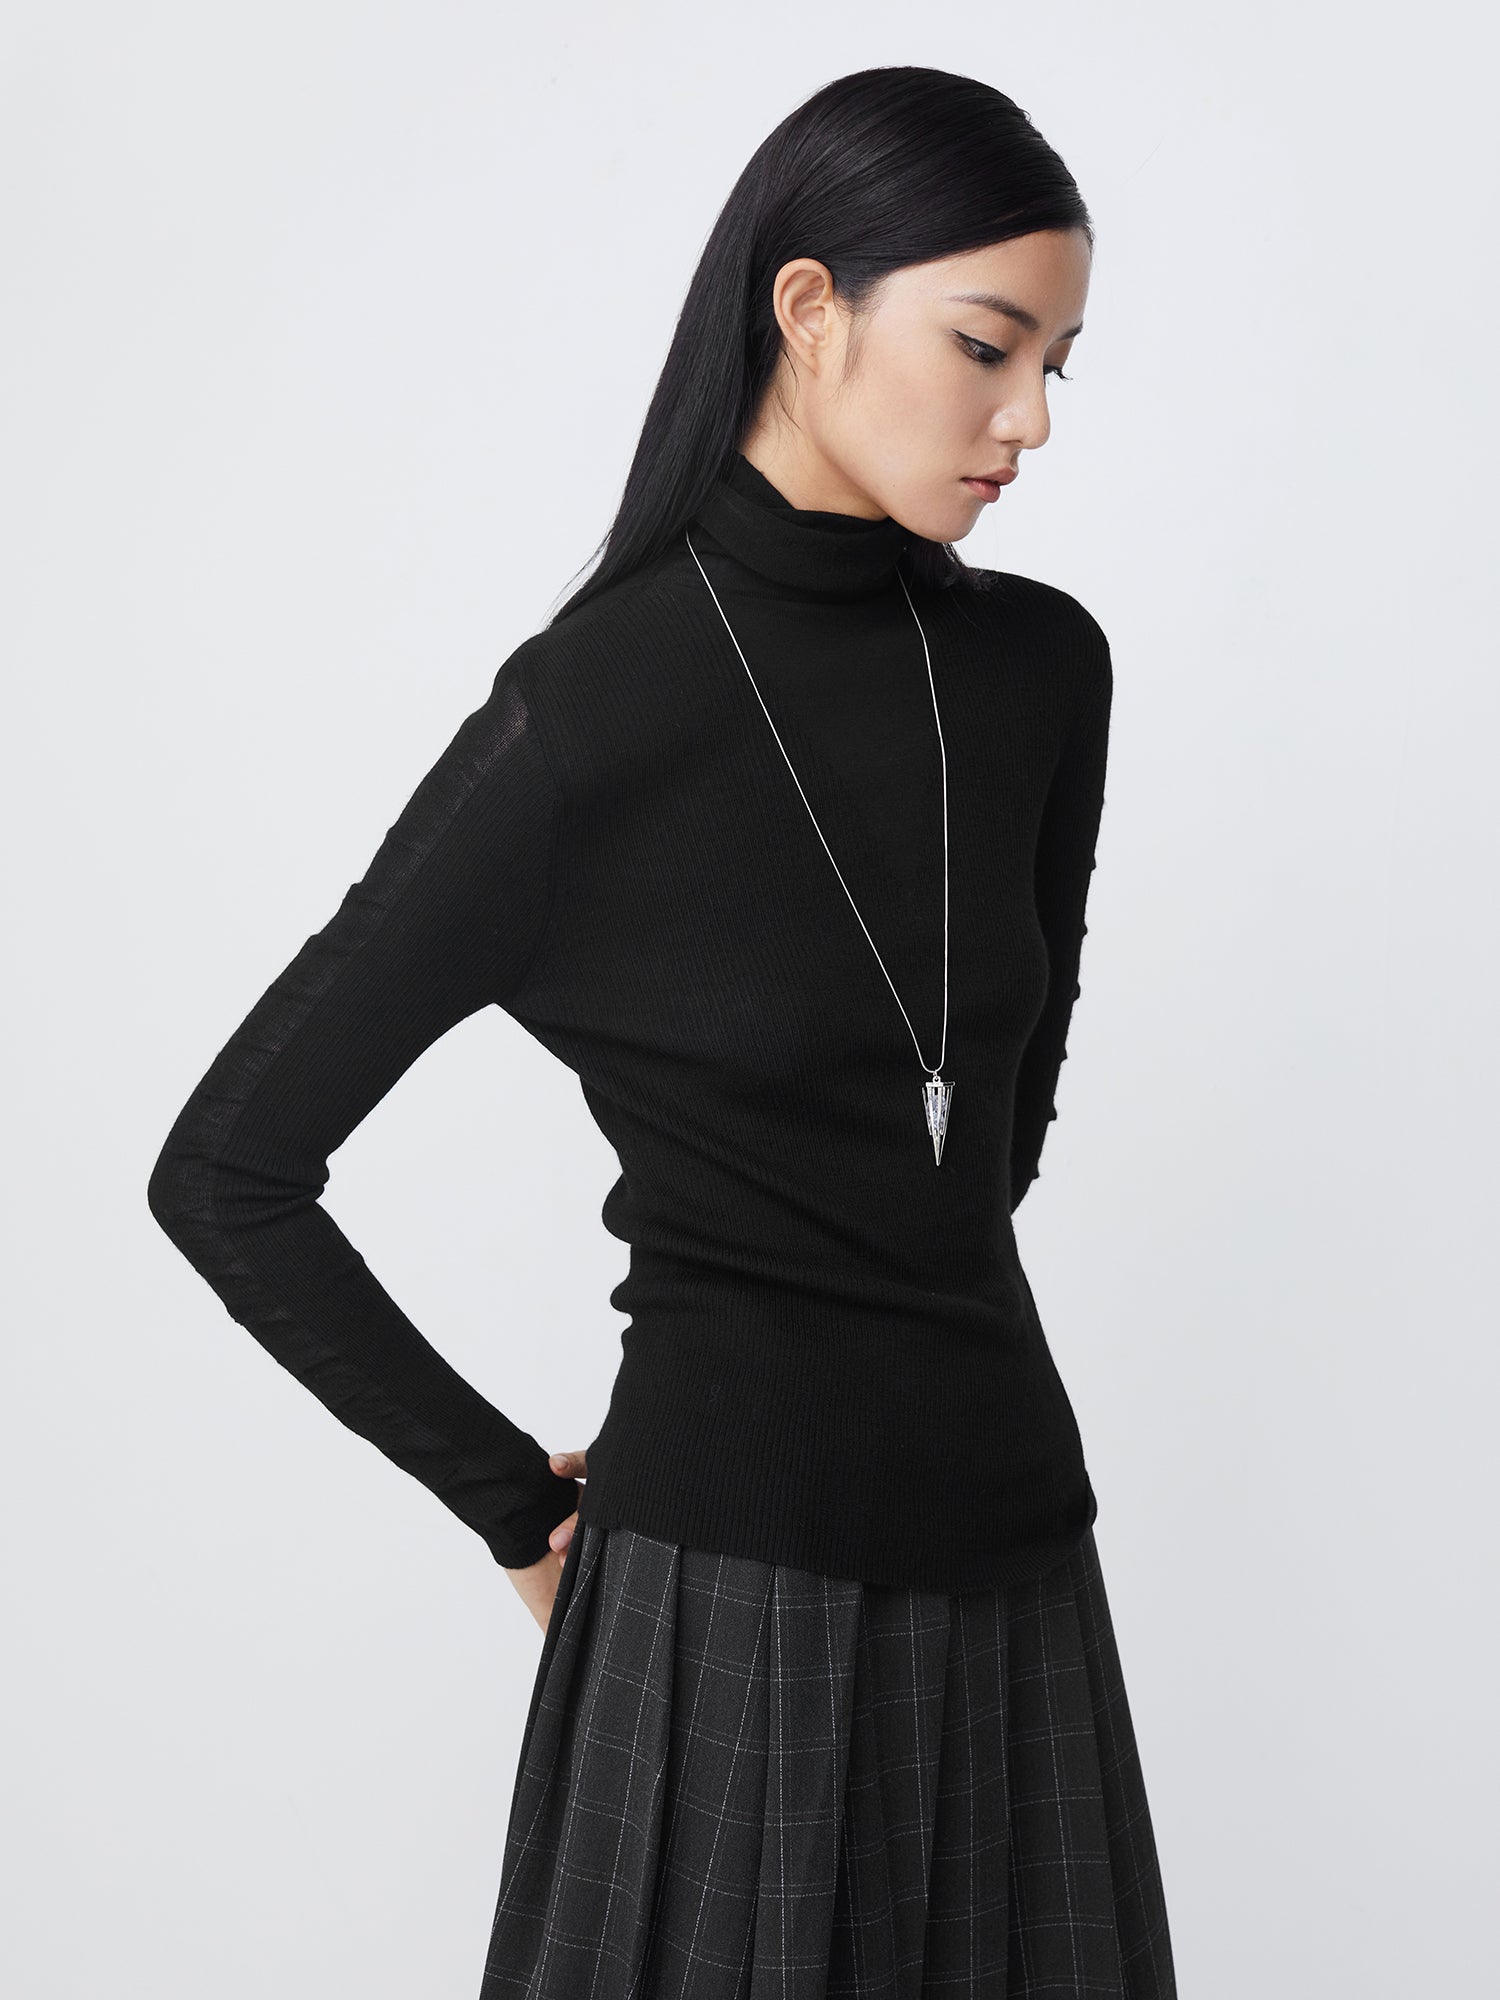 Simple High-Neck Slim-Fit Basic Bottoming Knitted Sweater